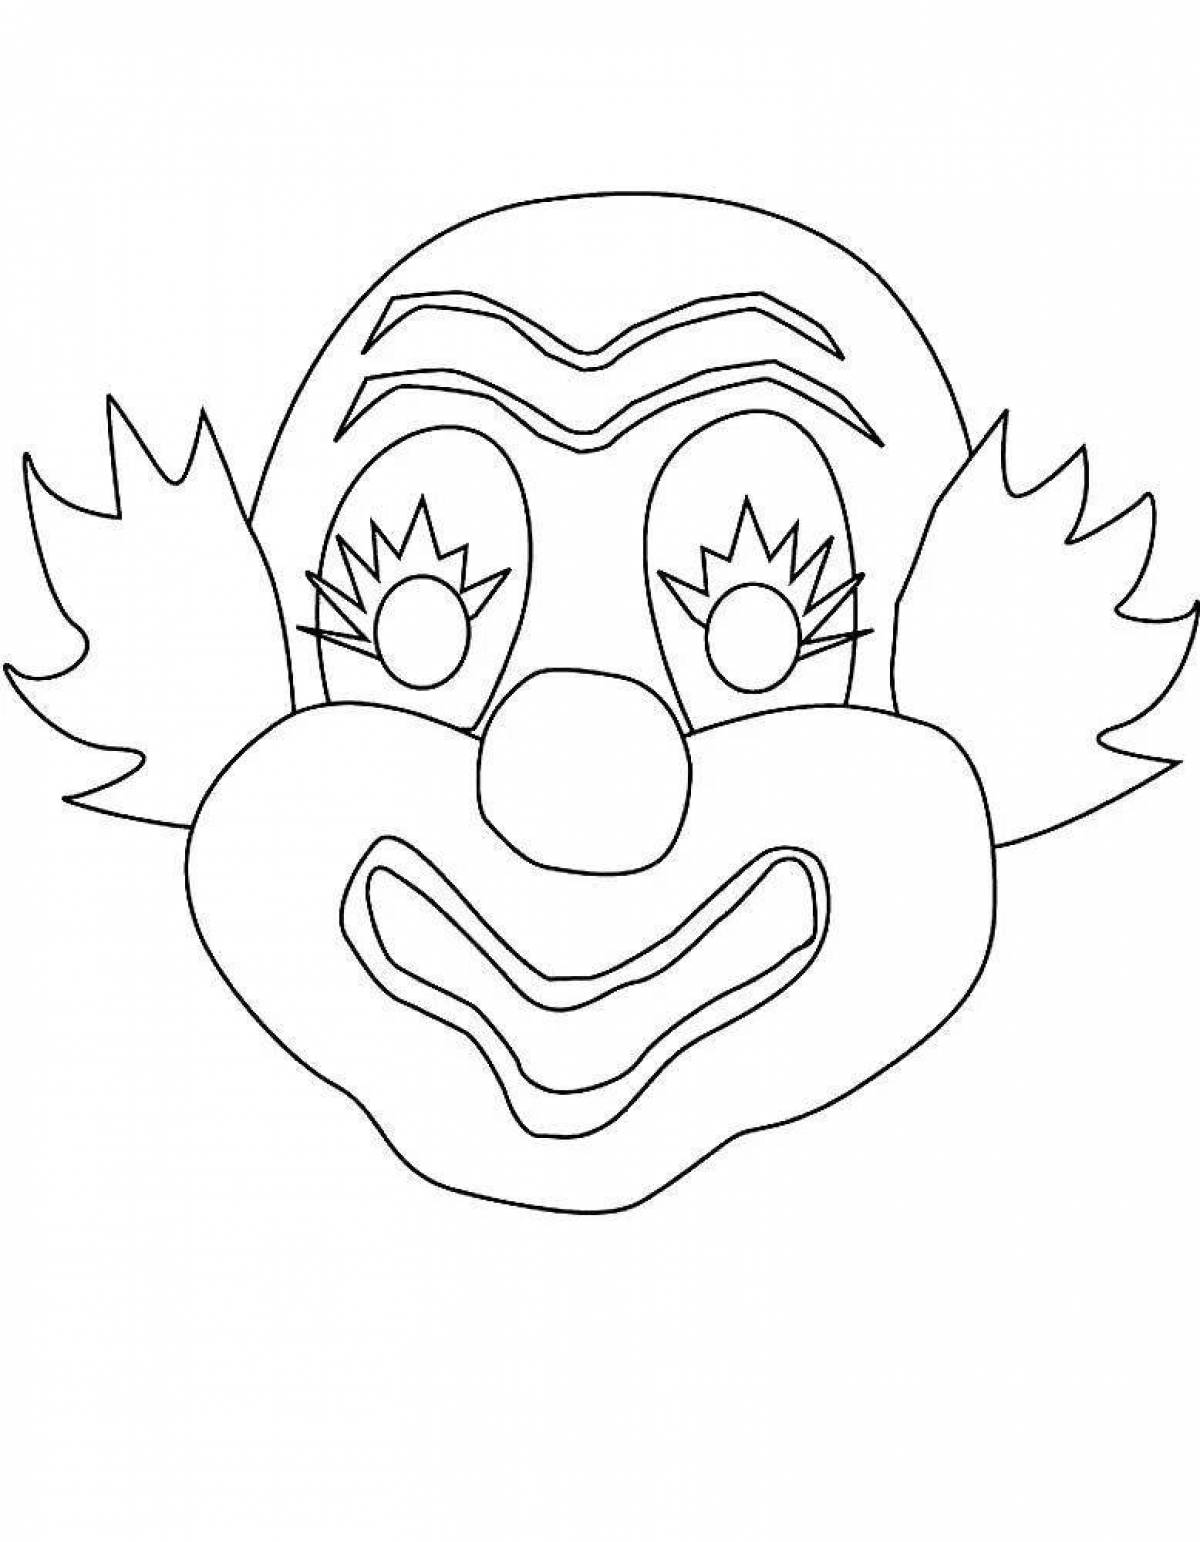 Exquisite clown face coloring page